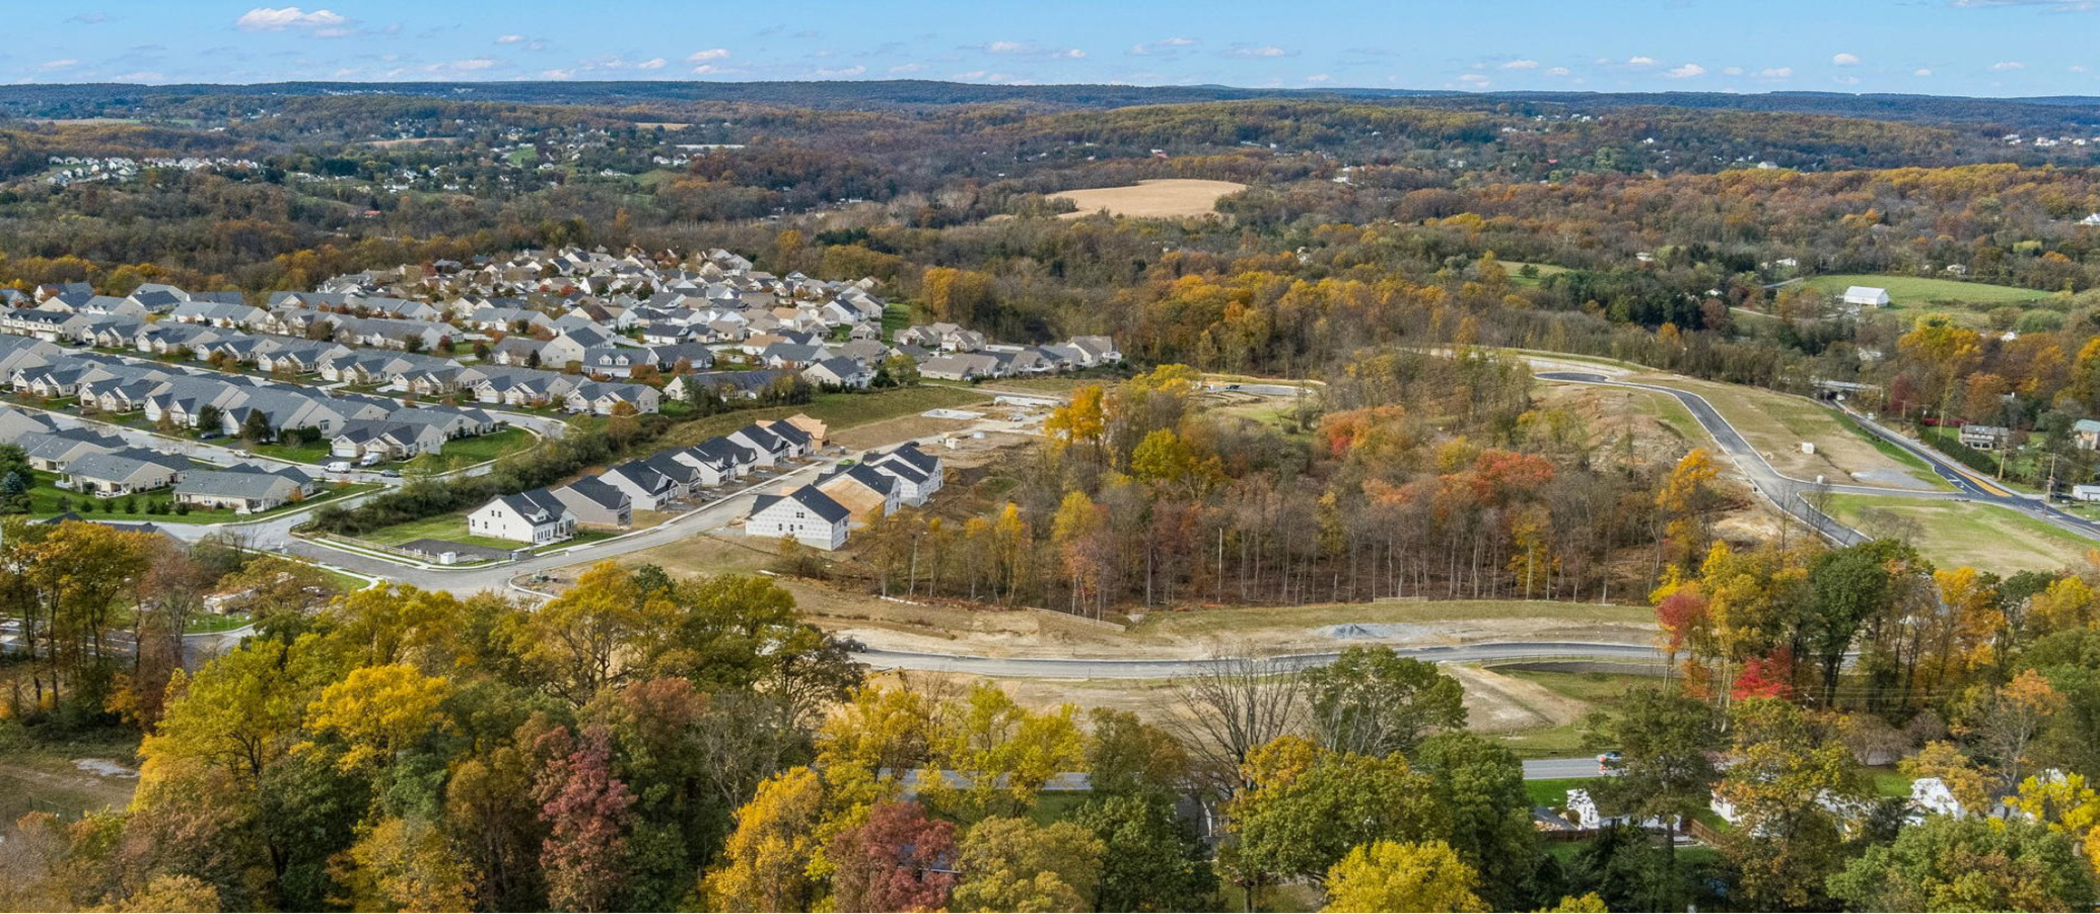 PEN_MeadowsatHillview_Pic_Fall_Aerial_4